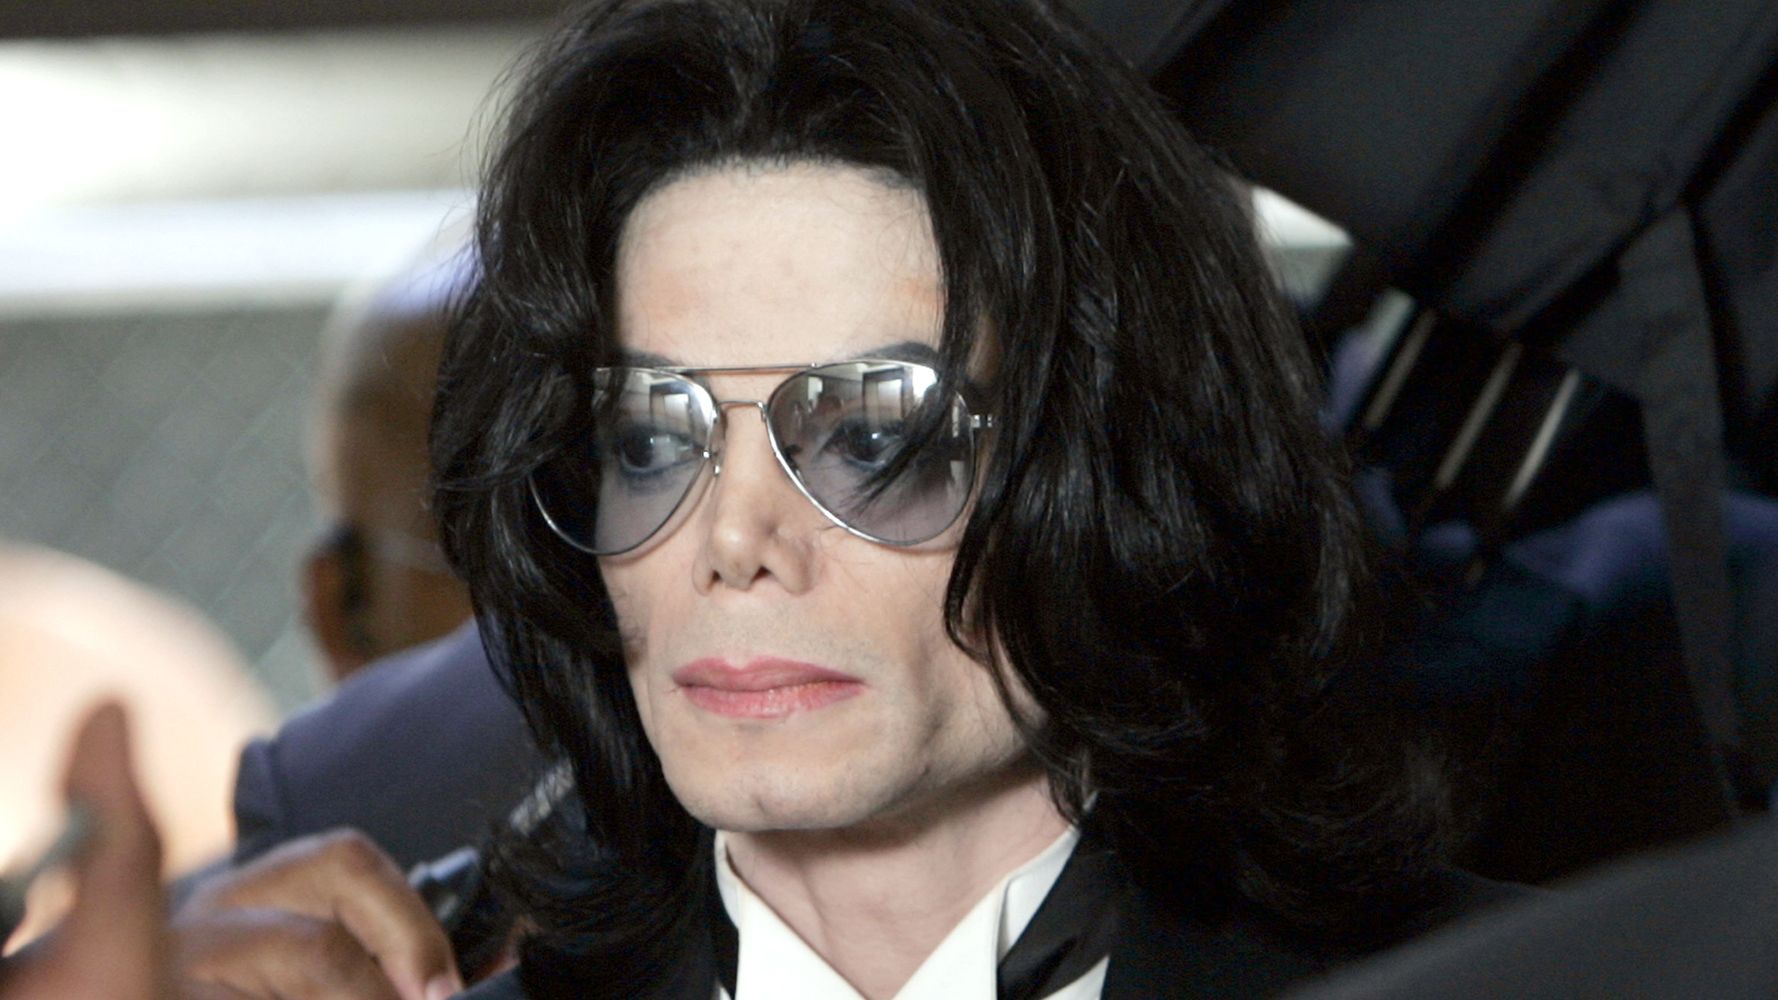 1778px x 1000px - Michael Jackson Stockpiled Nude Images Of Children ...